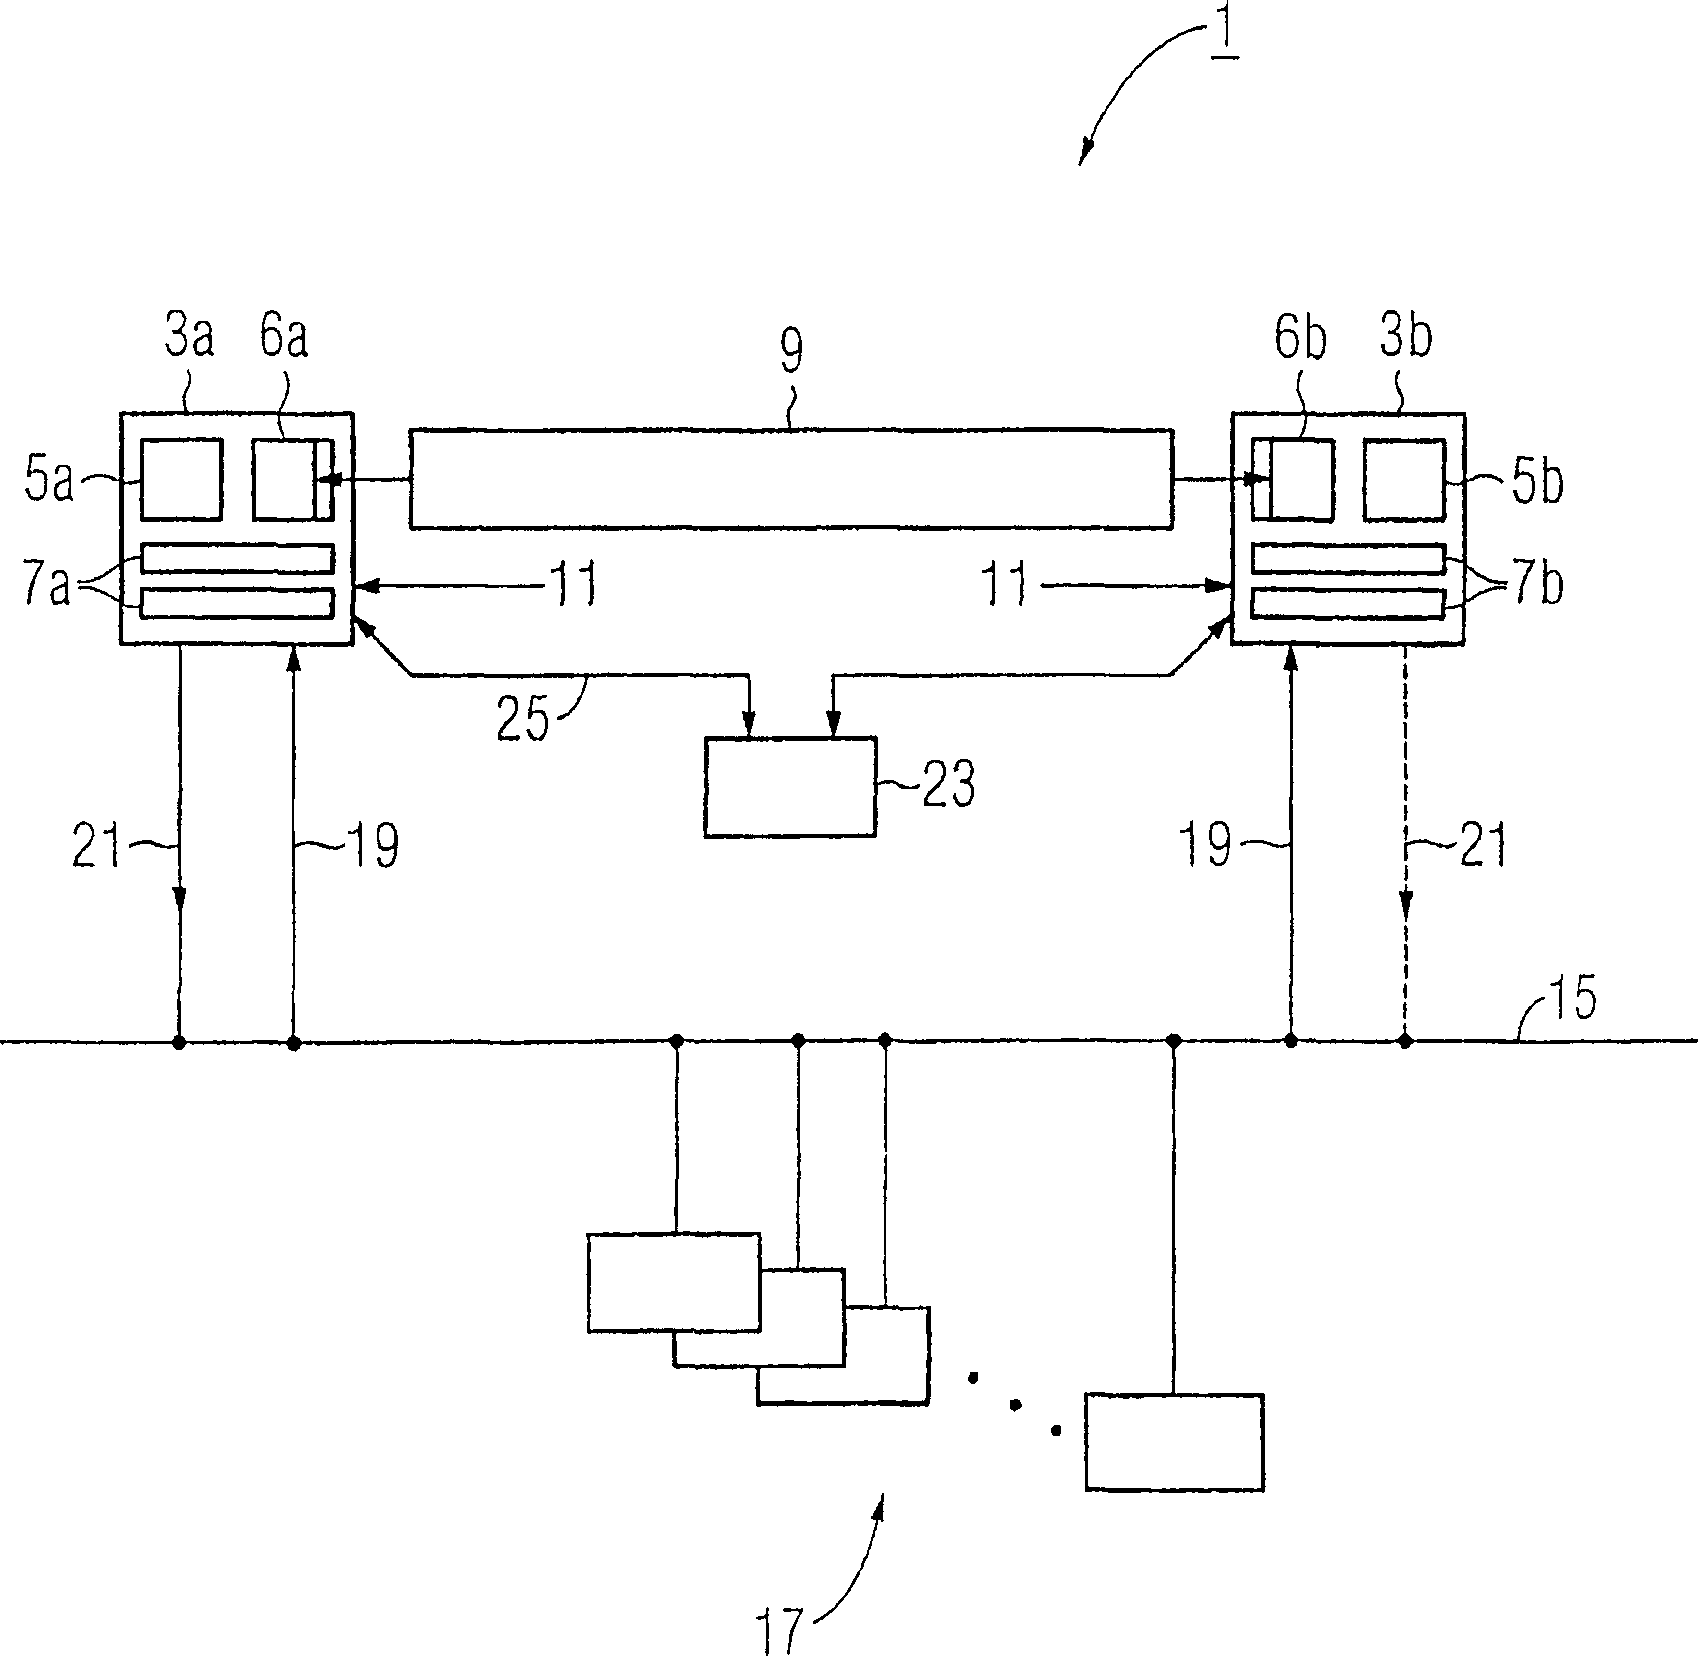 Redundant automation system for controlling a technical device, and method for operating the same